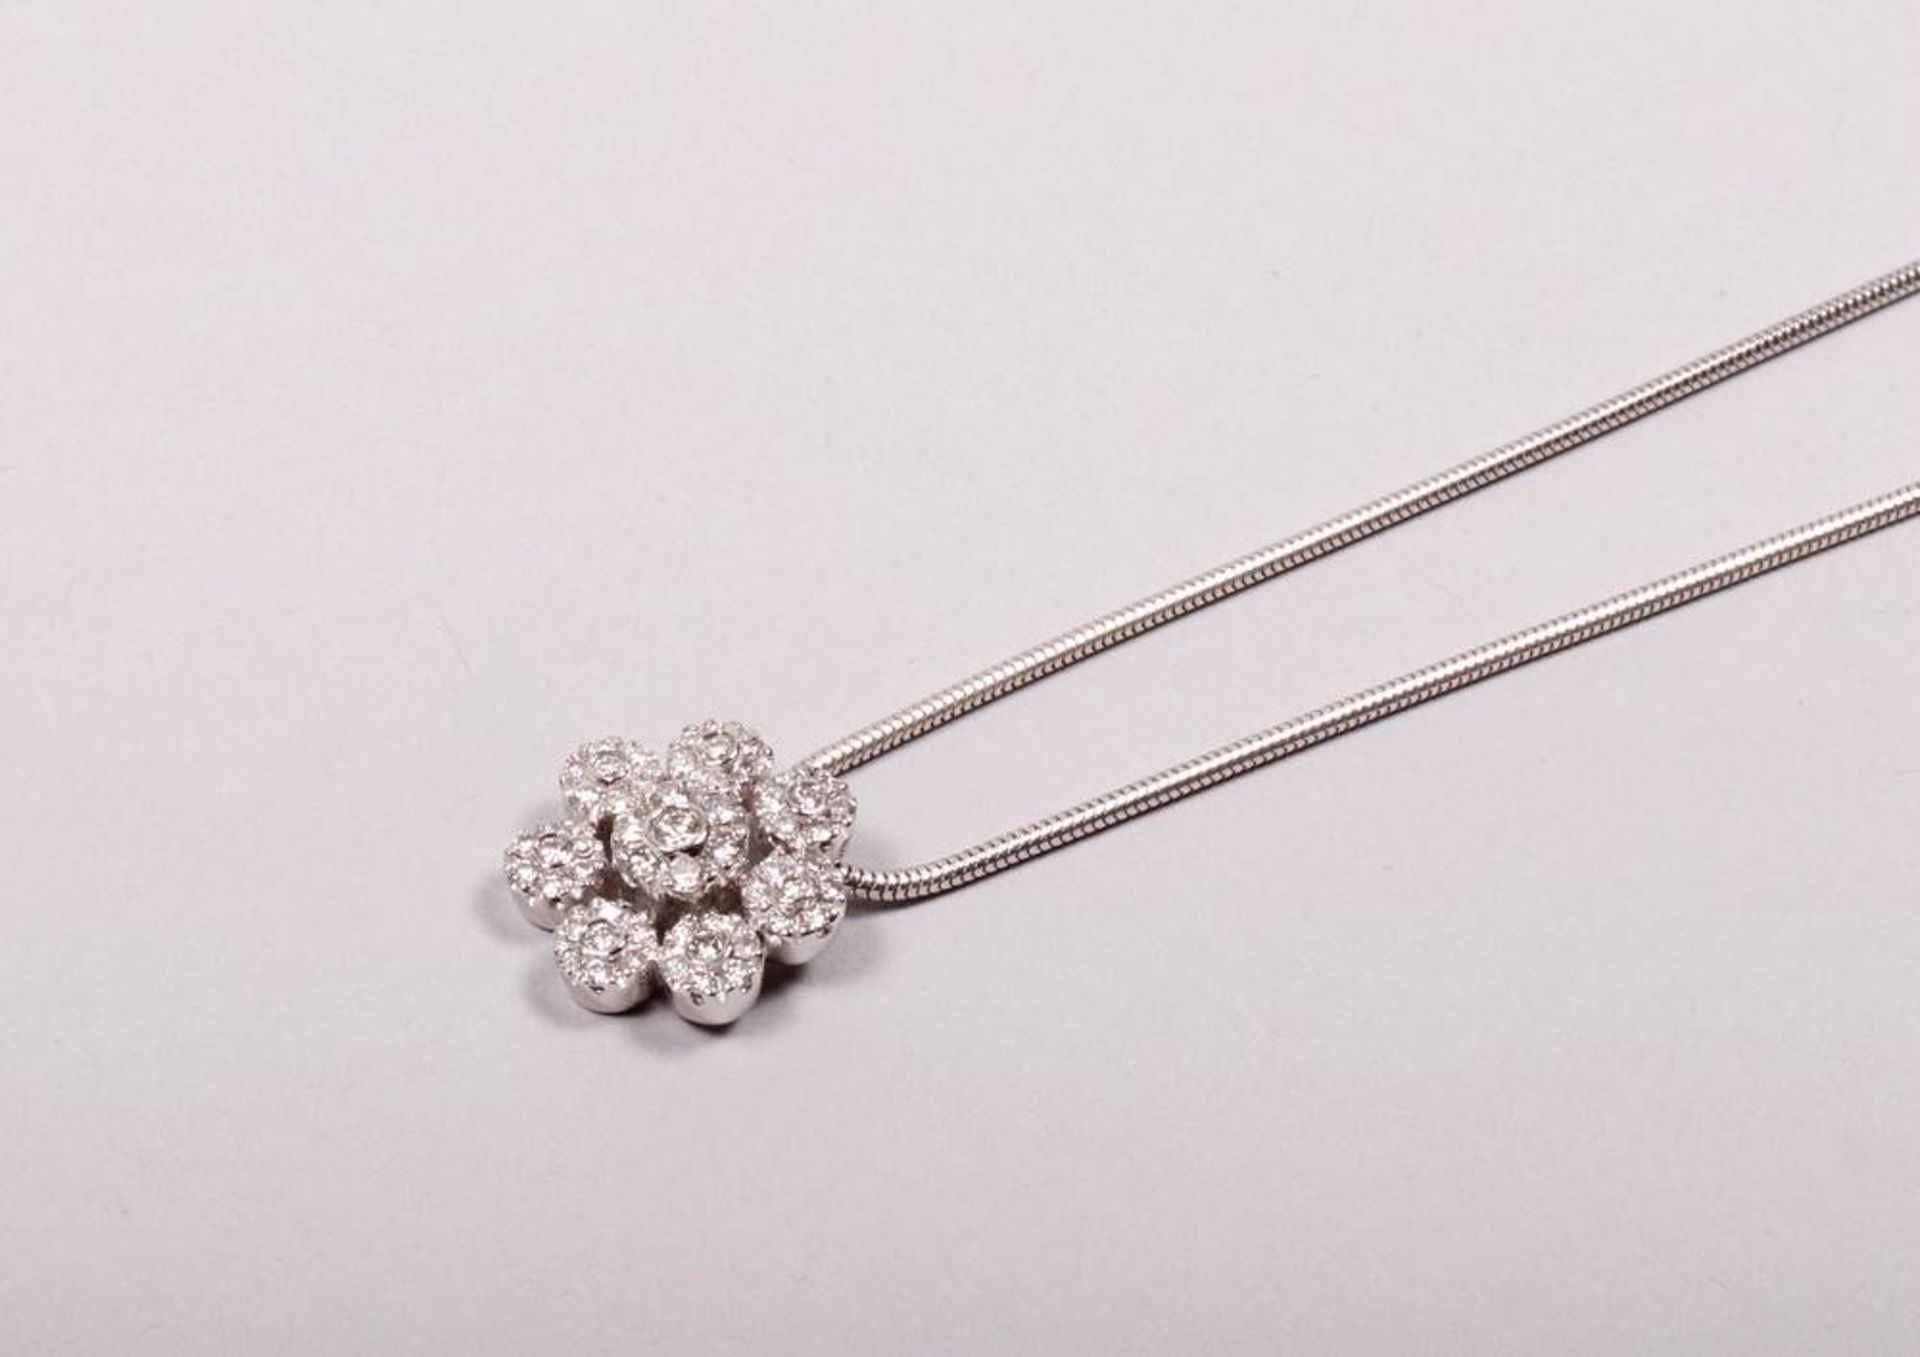 Collier750 white gold, flower shaped pendant, set with 55 brilliant cut diamonds, slightly tinted